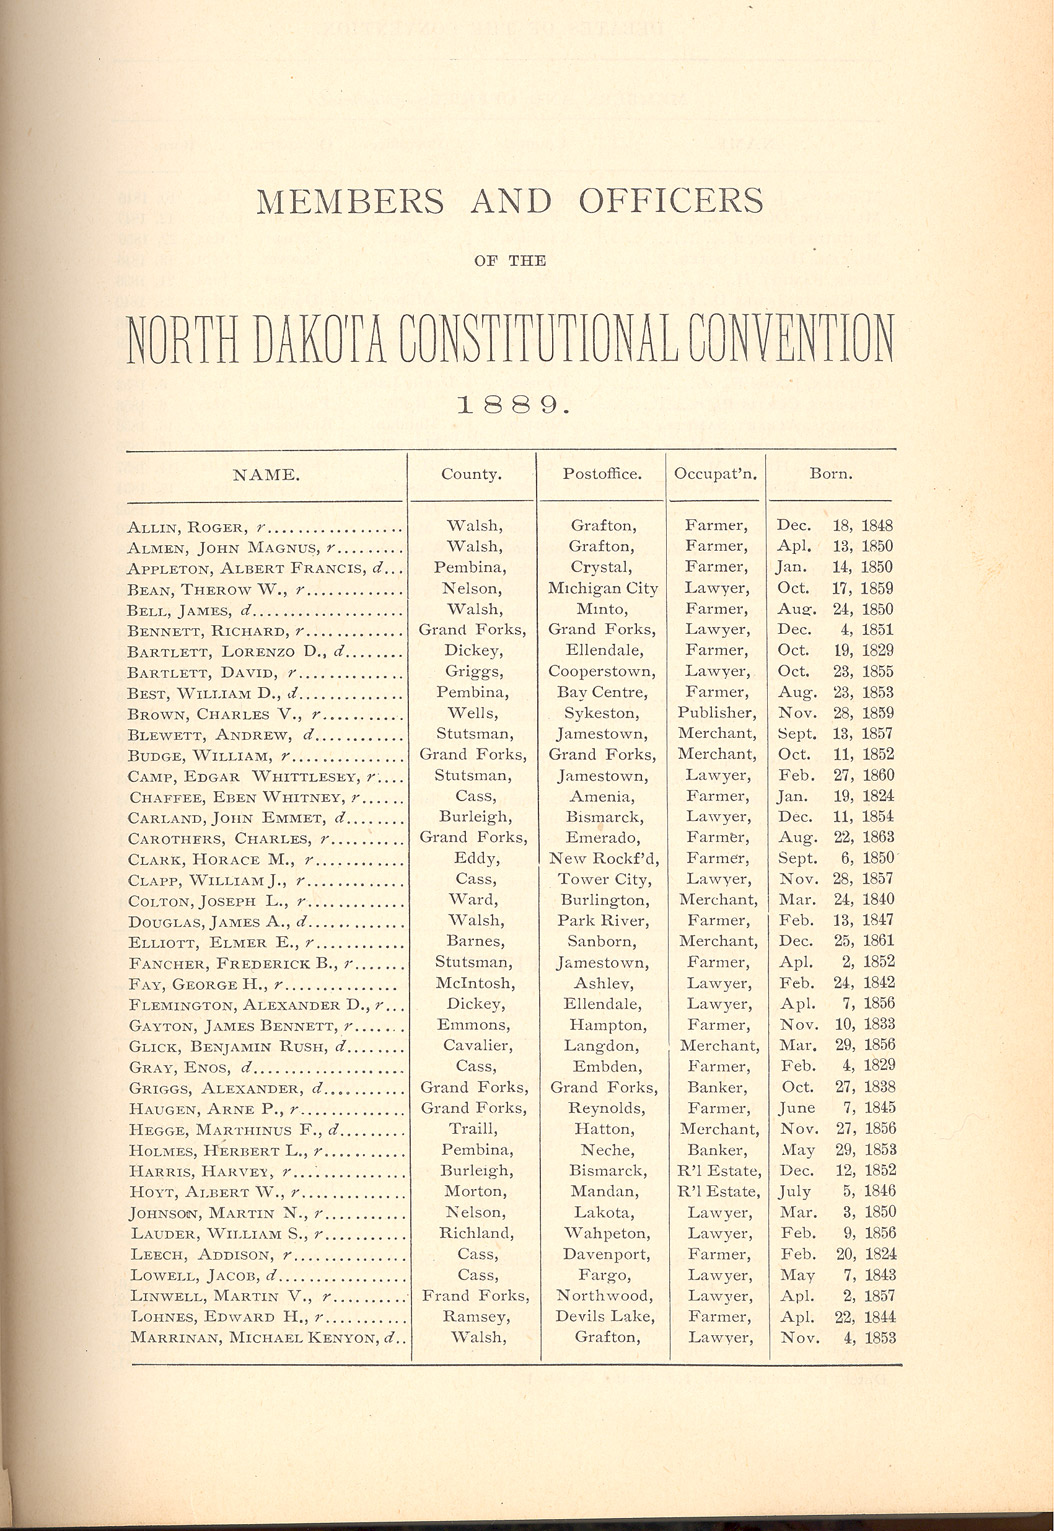 The delegates to the state constitutional convention met on July 4, 1889 to write a constitution for the new state. The delegates were farmers, businessmen, and lawyers. They debated each question carefully before deciding on the wording of each article of the constitution.